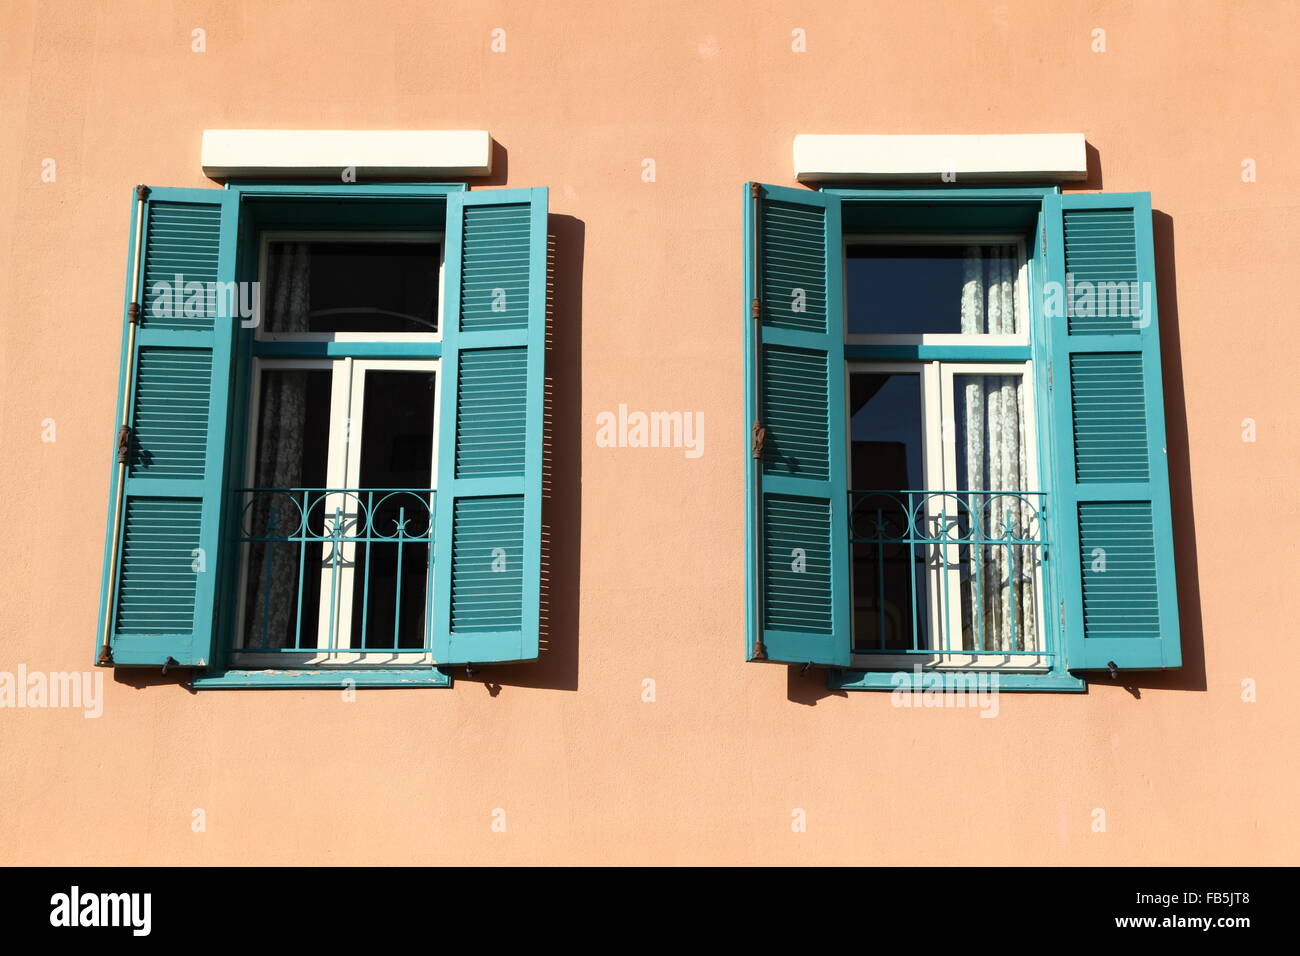 Beirut Architecture Details: Traditional Style Window Stock Photo